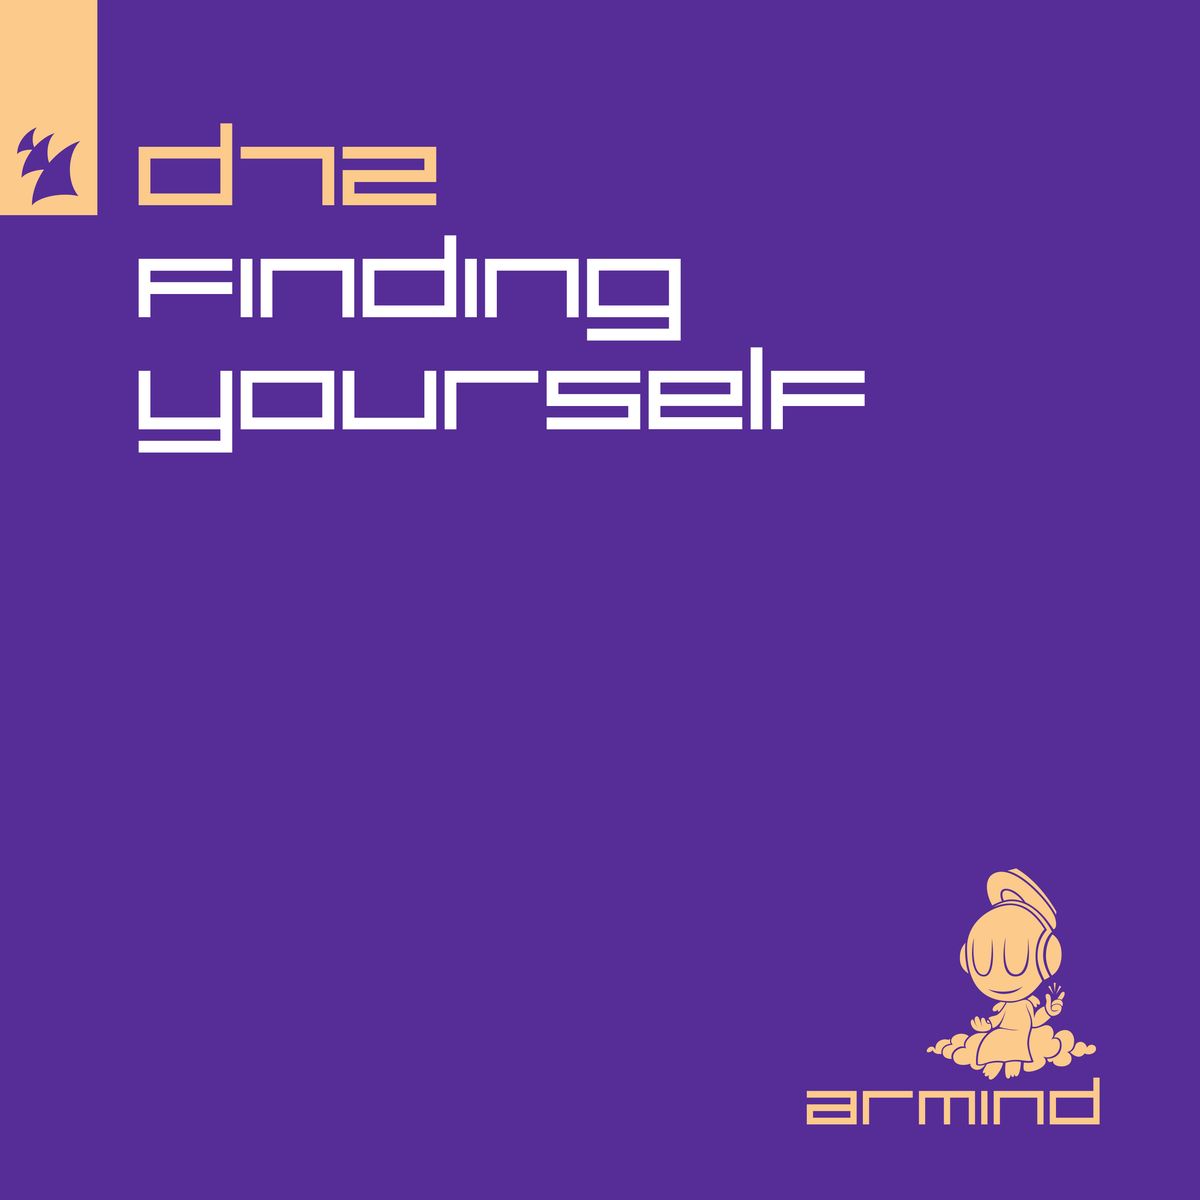 D72 presents Finding Yourself on Armind